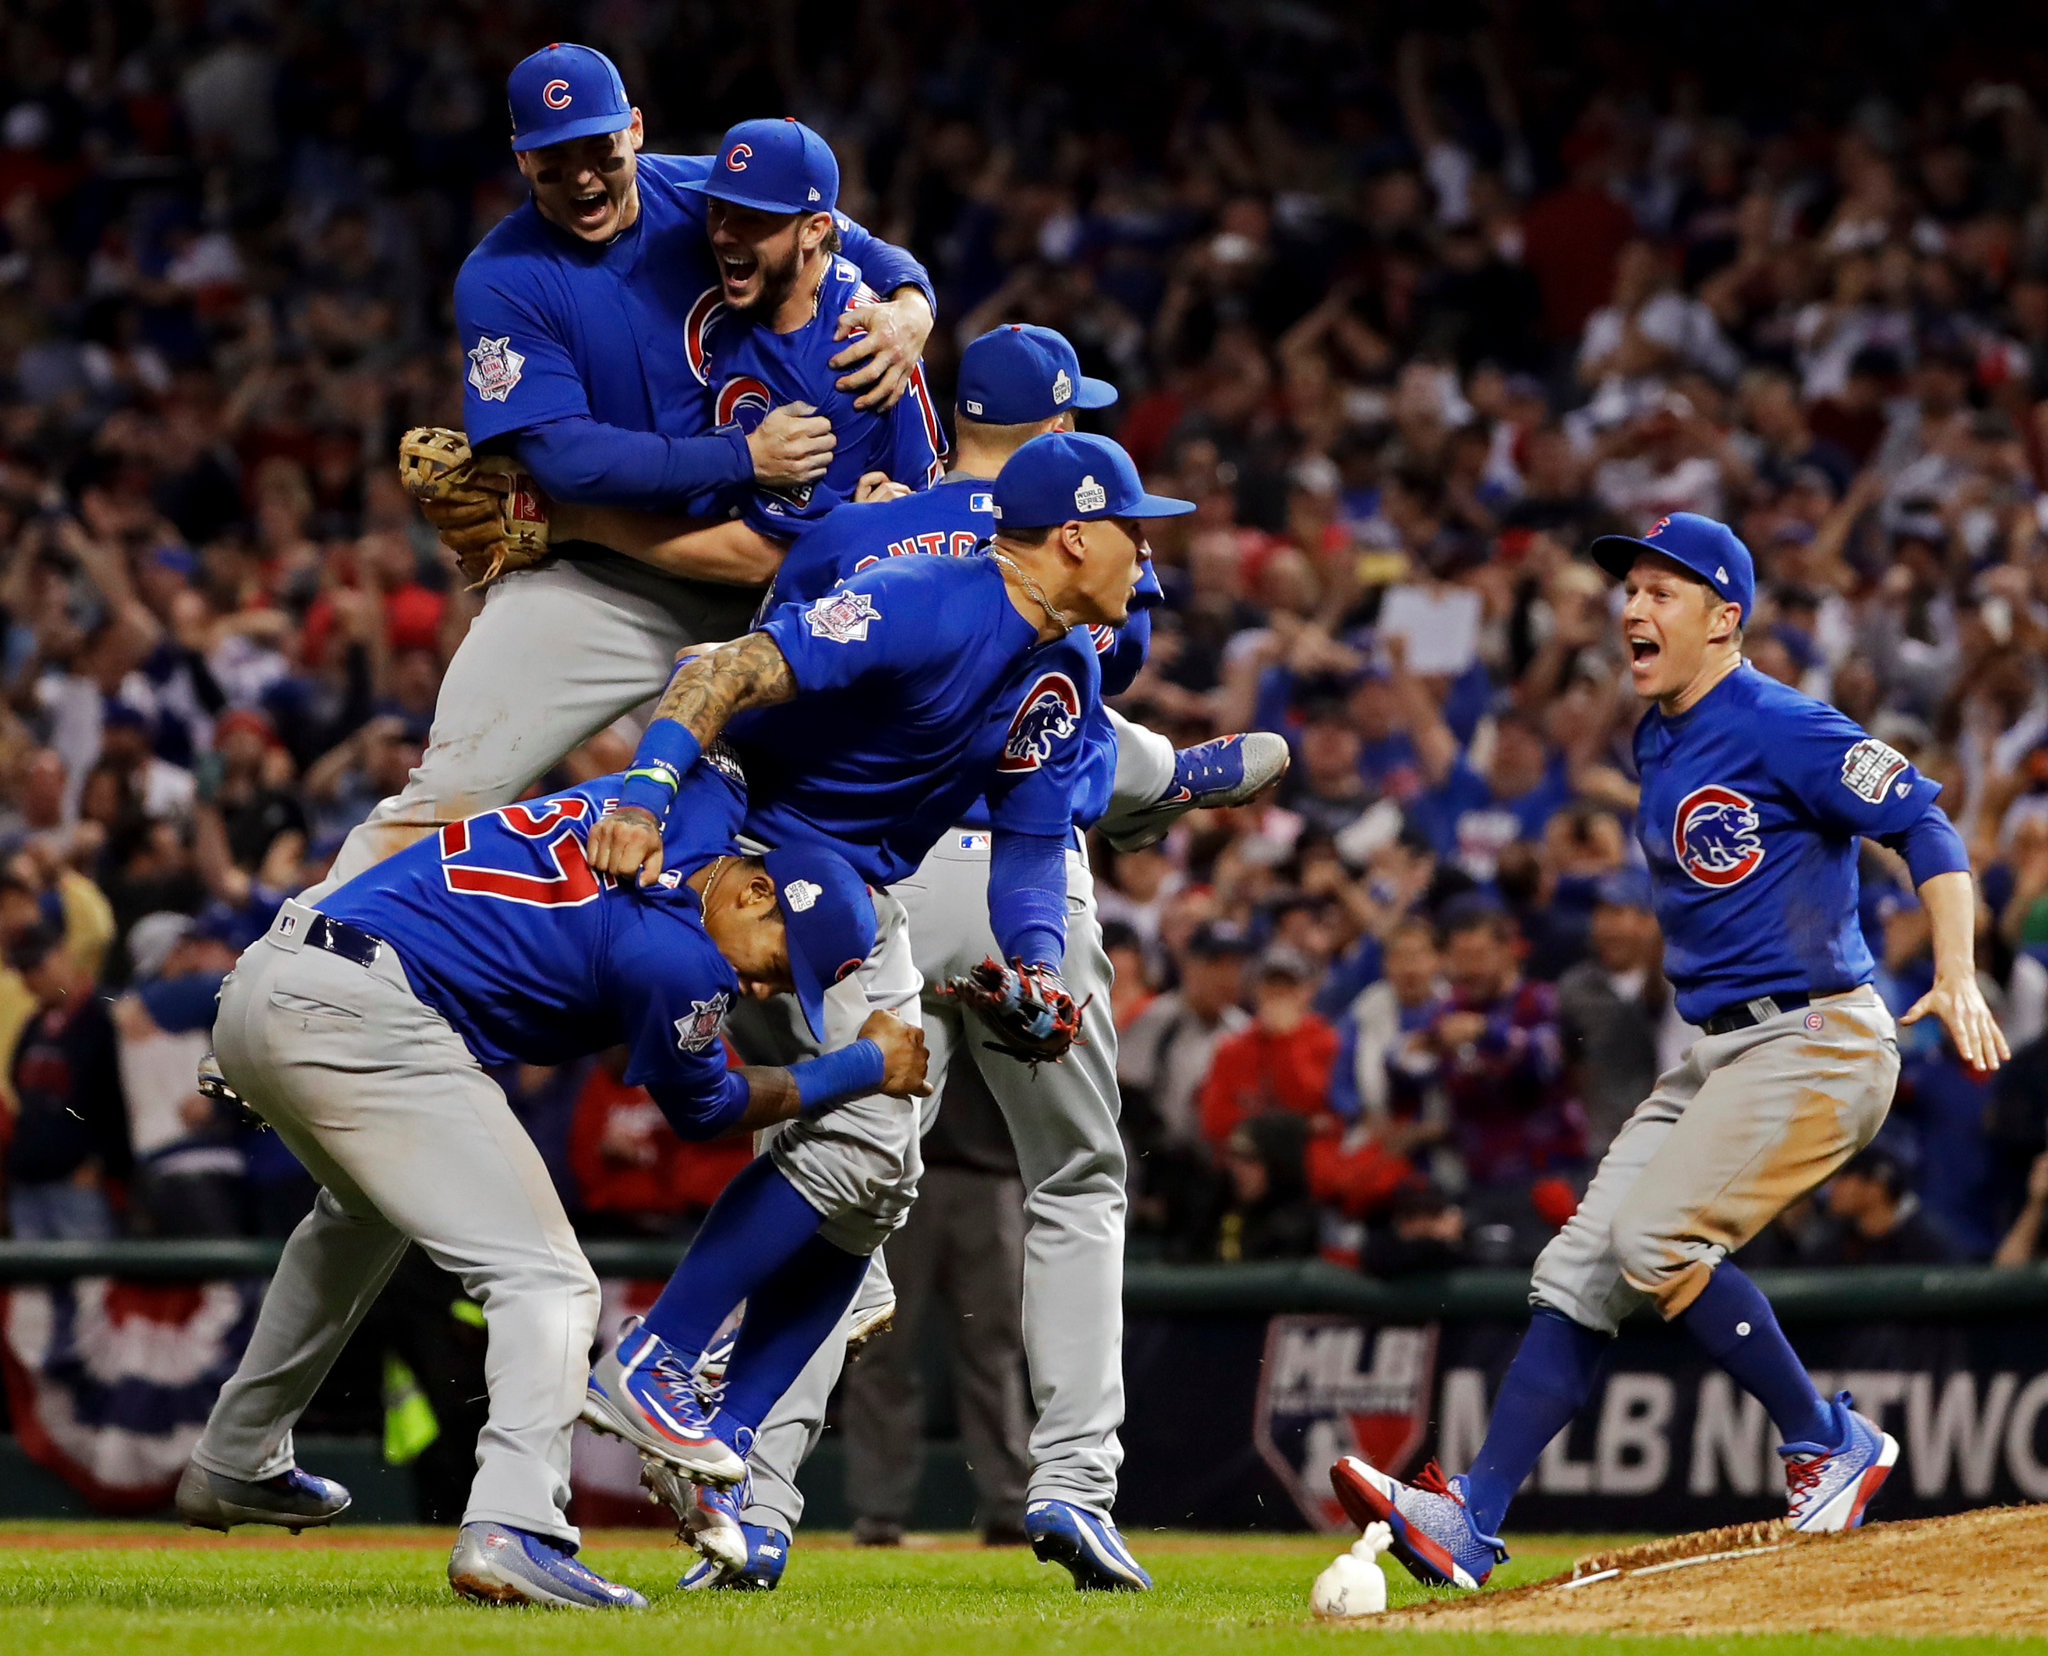 Cubs rock the World Series